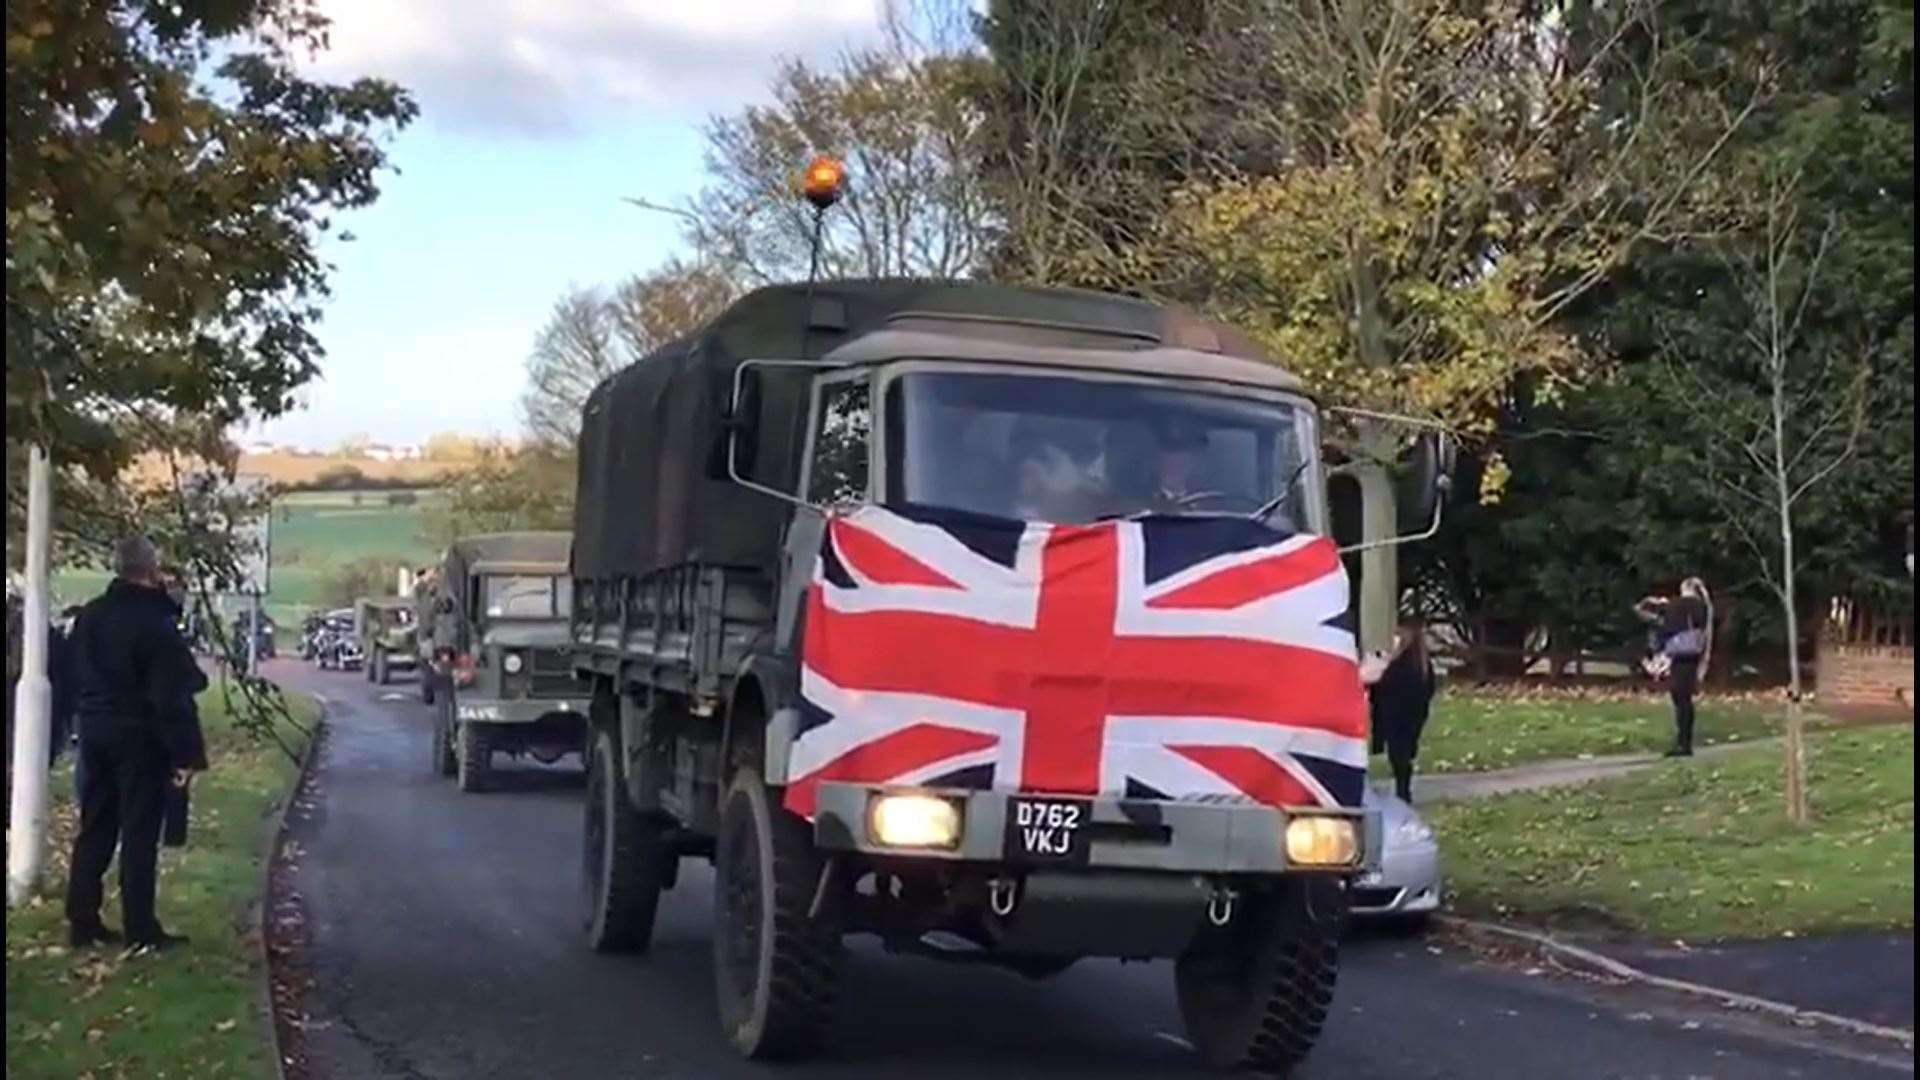 Parade of military vehicles at Eastchurch for Remembrance Sunday (21350109)